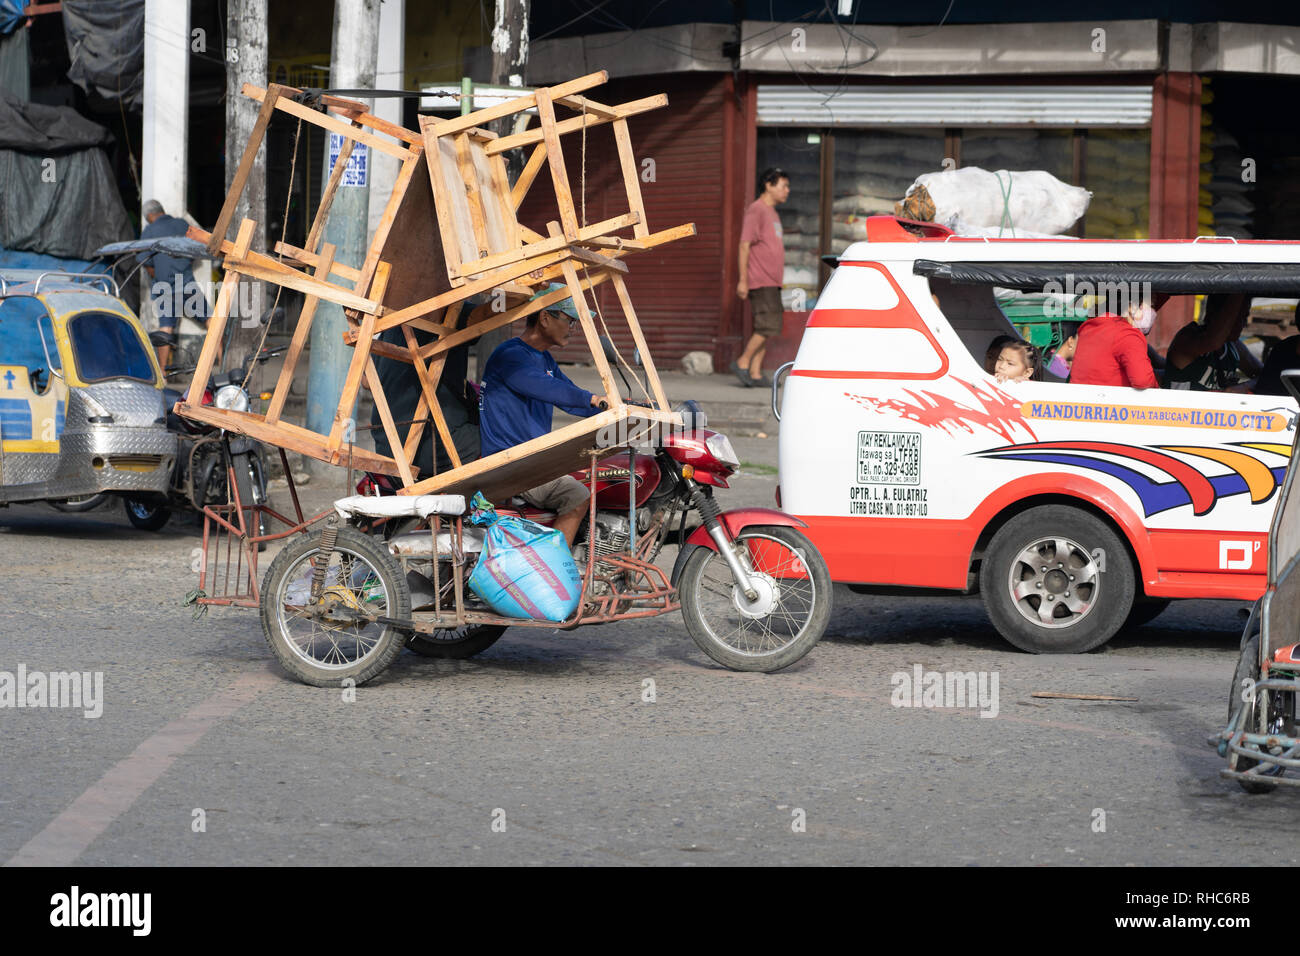 A Tricycle vehicle overloaded with what appears to be wooden tables. Stock Photo